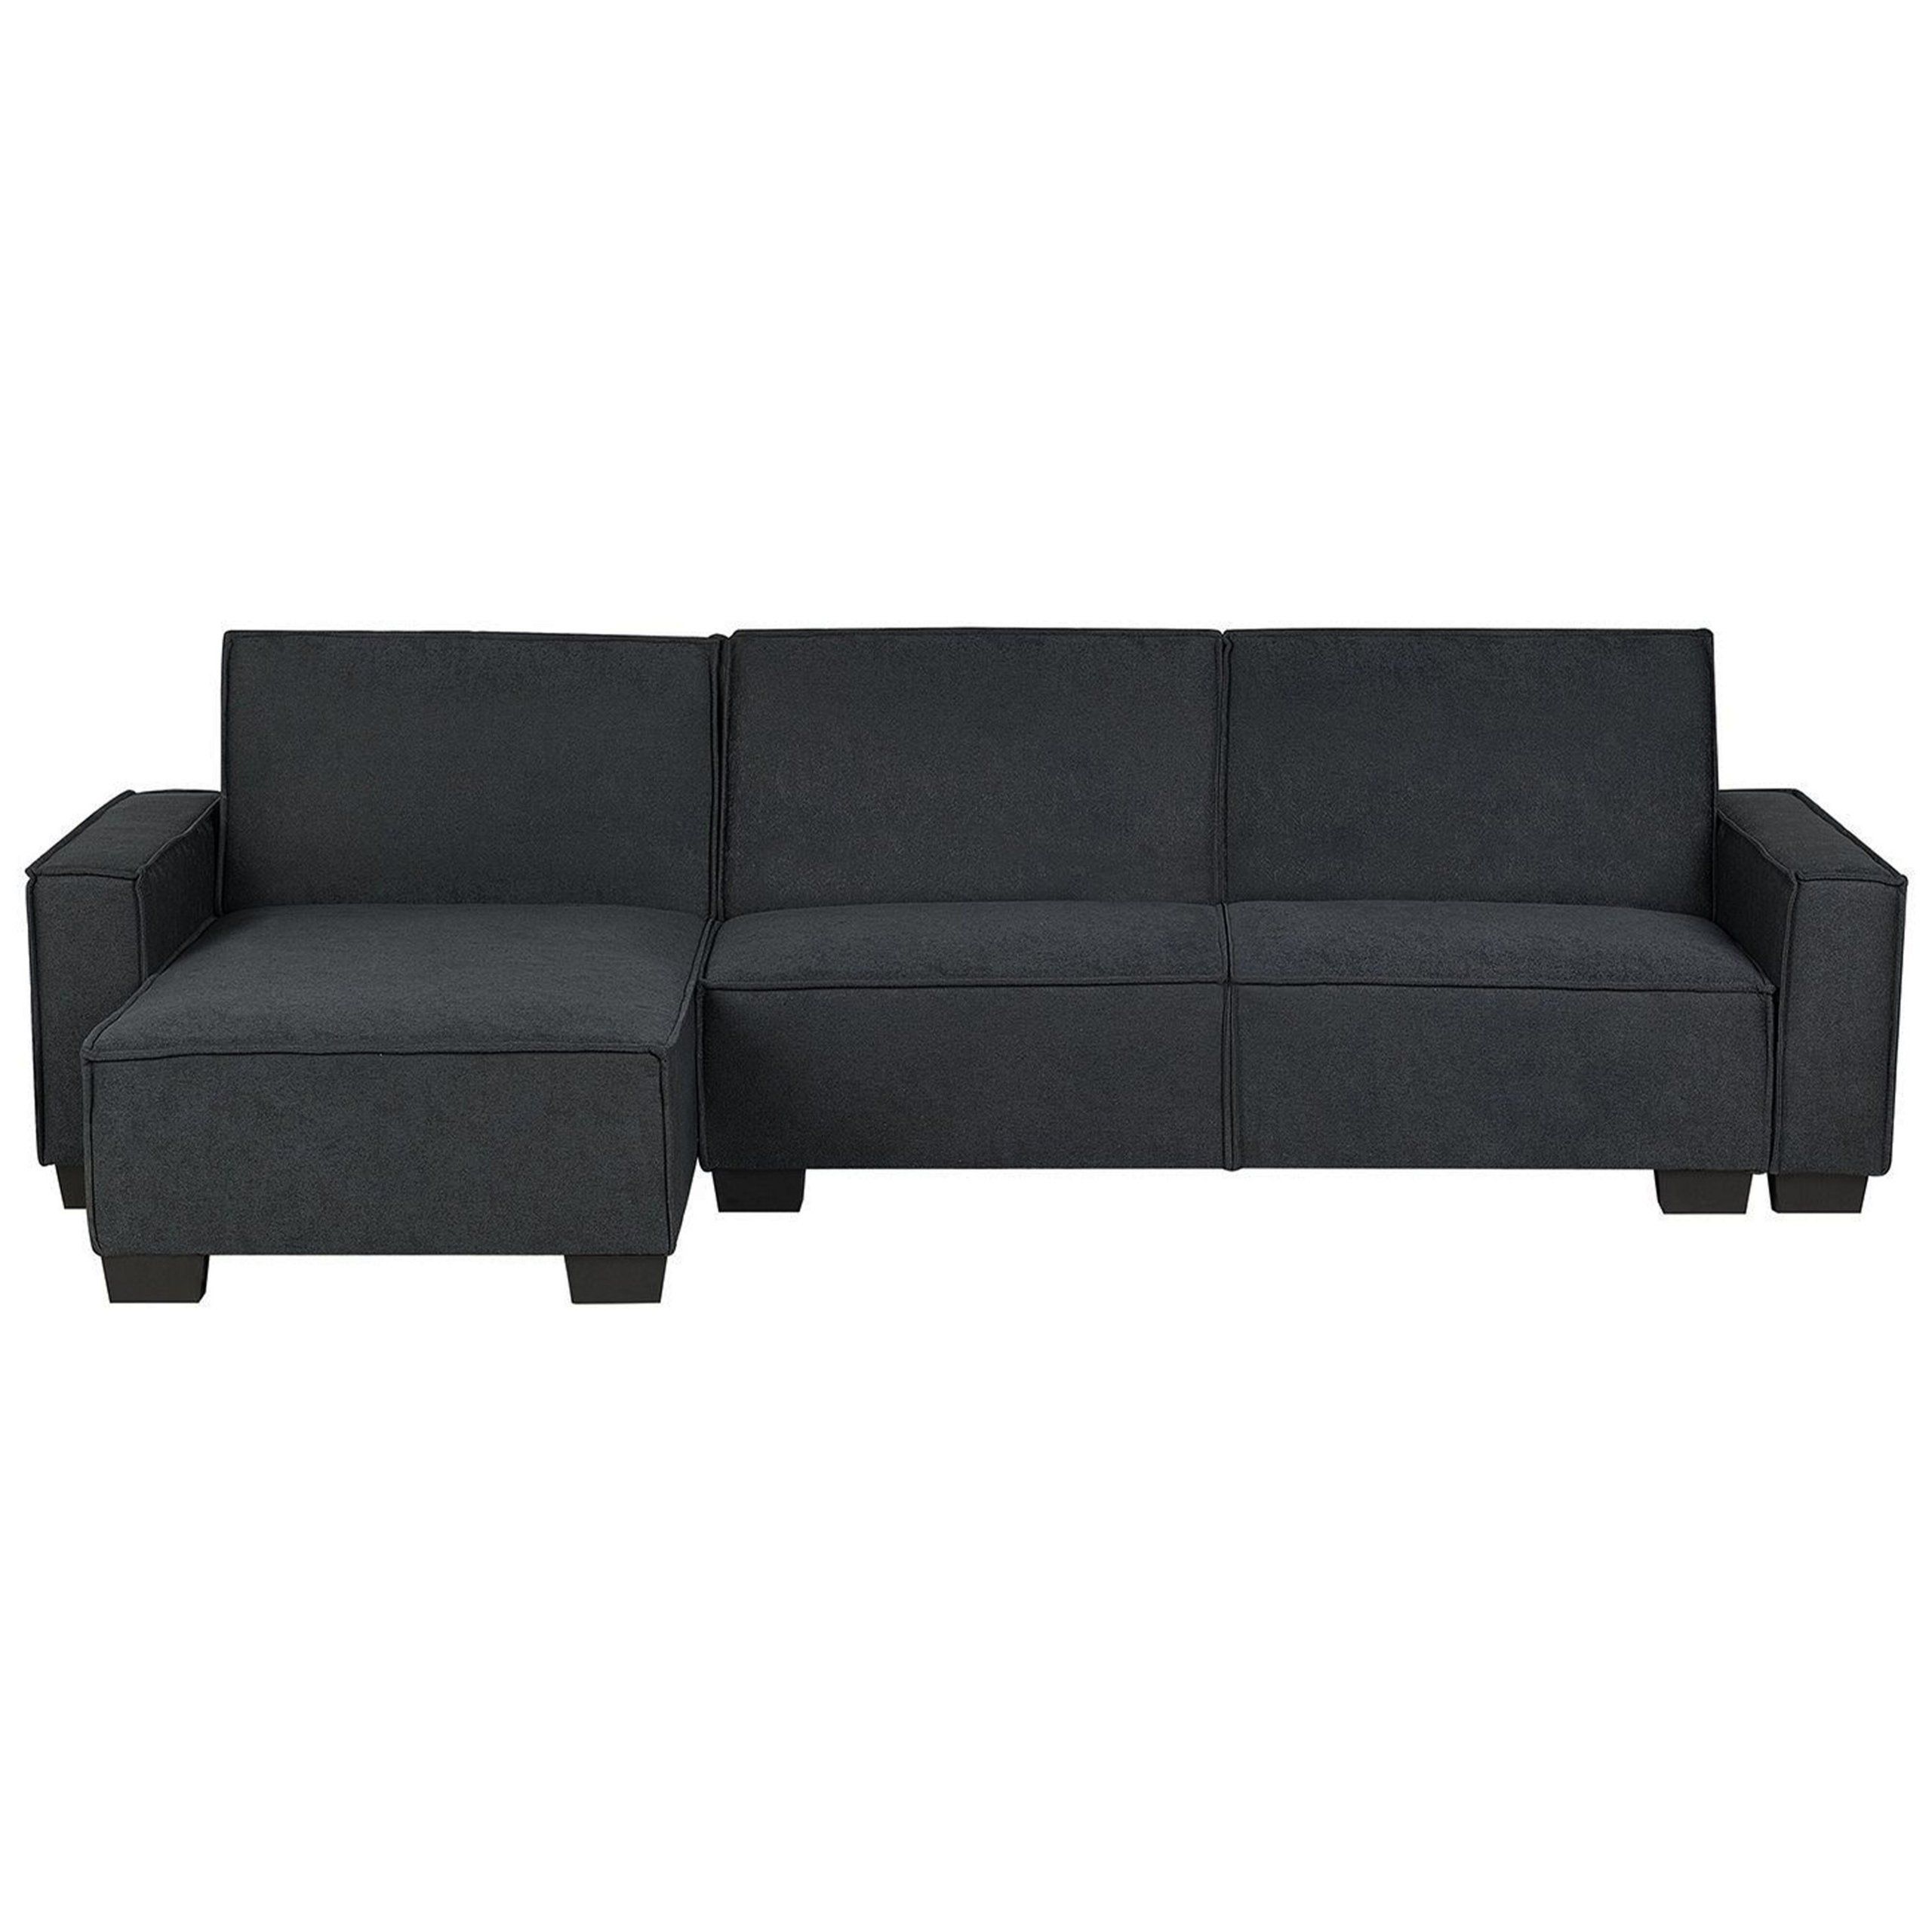 Beliani Corner Sofa Bed Graphite Grey Fabric Upholstered 3 Seater Right Hand L-Shaped Bed